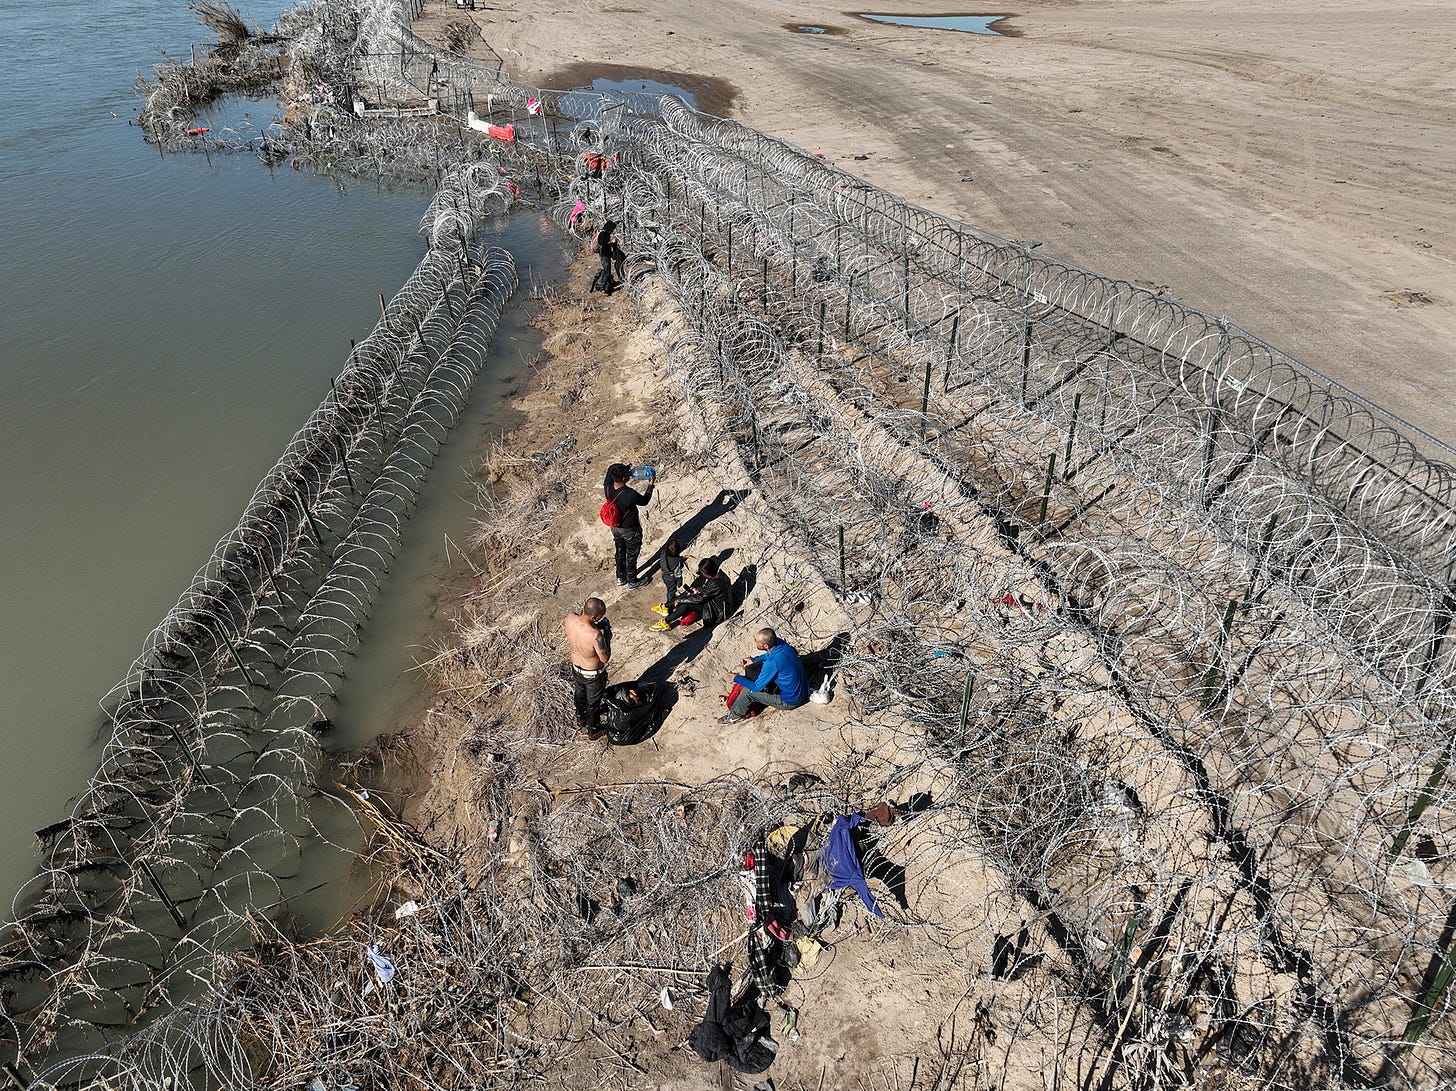 An aerial view of migrants walking along razor wire after crossing the Rio Grande into the United States on January 28...